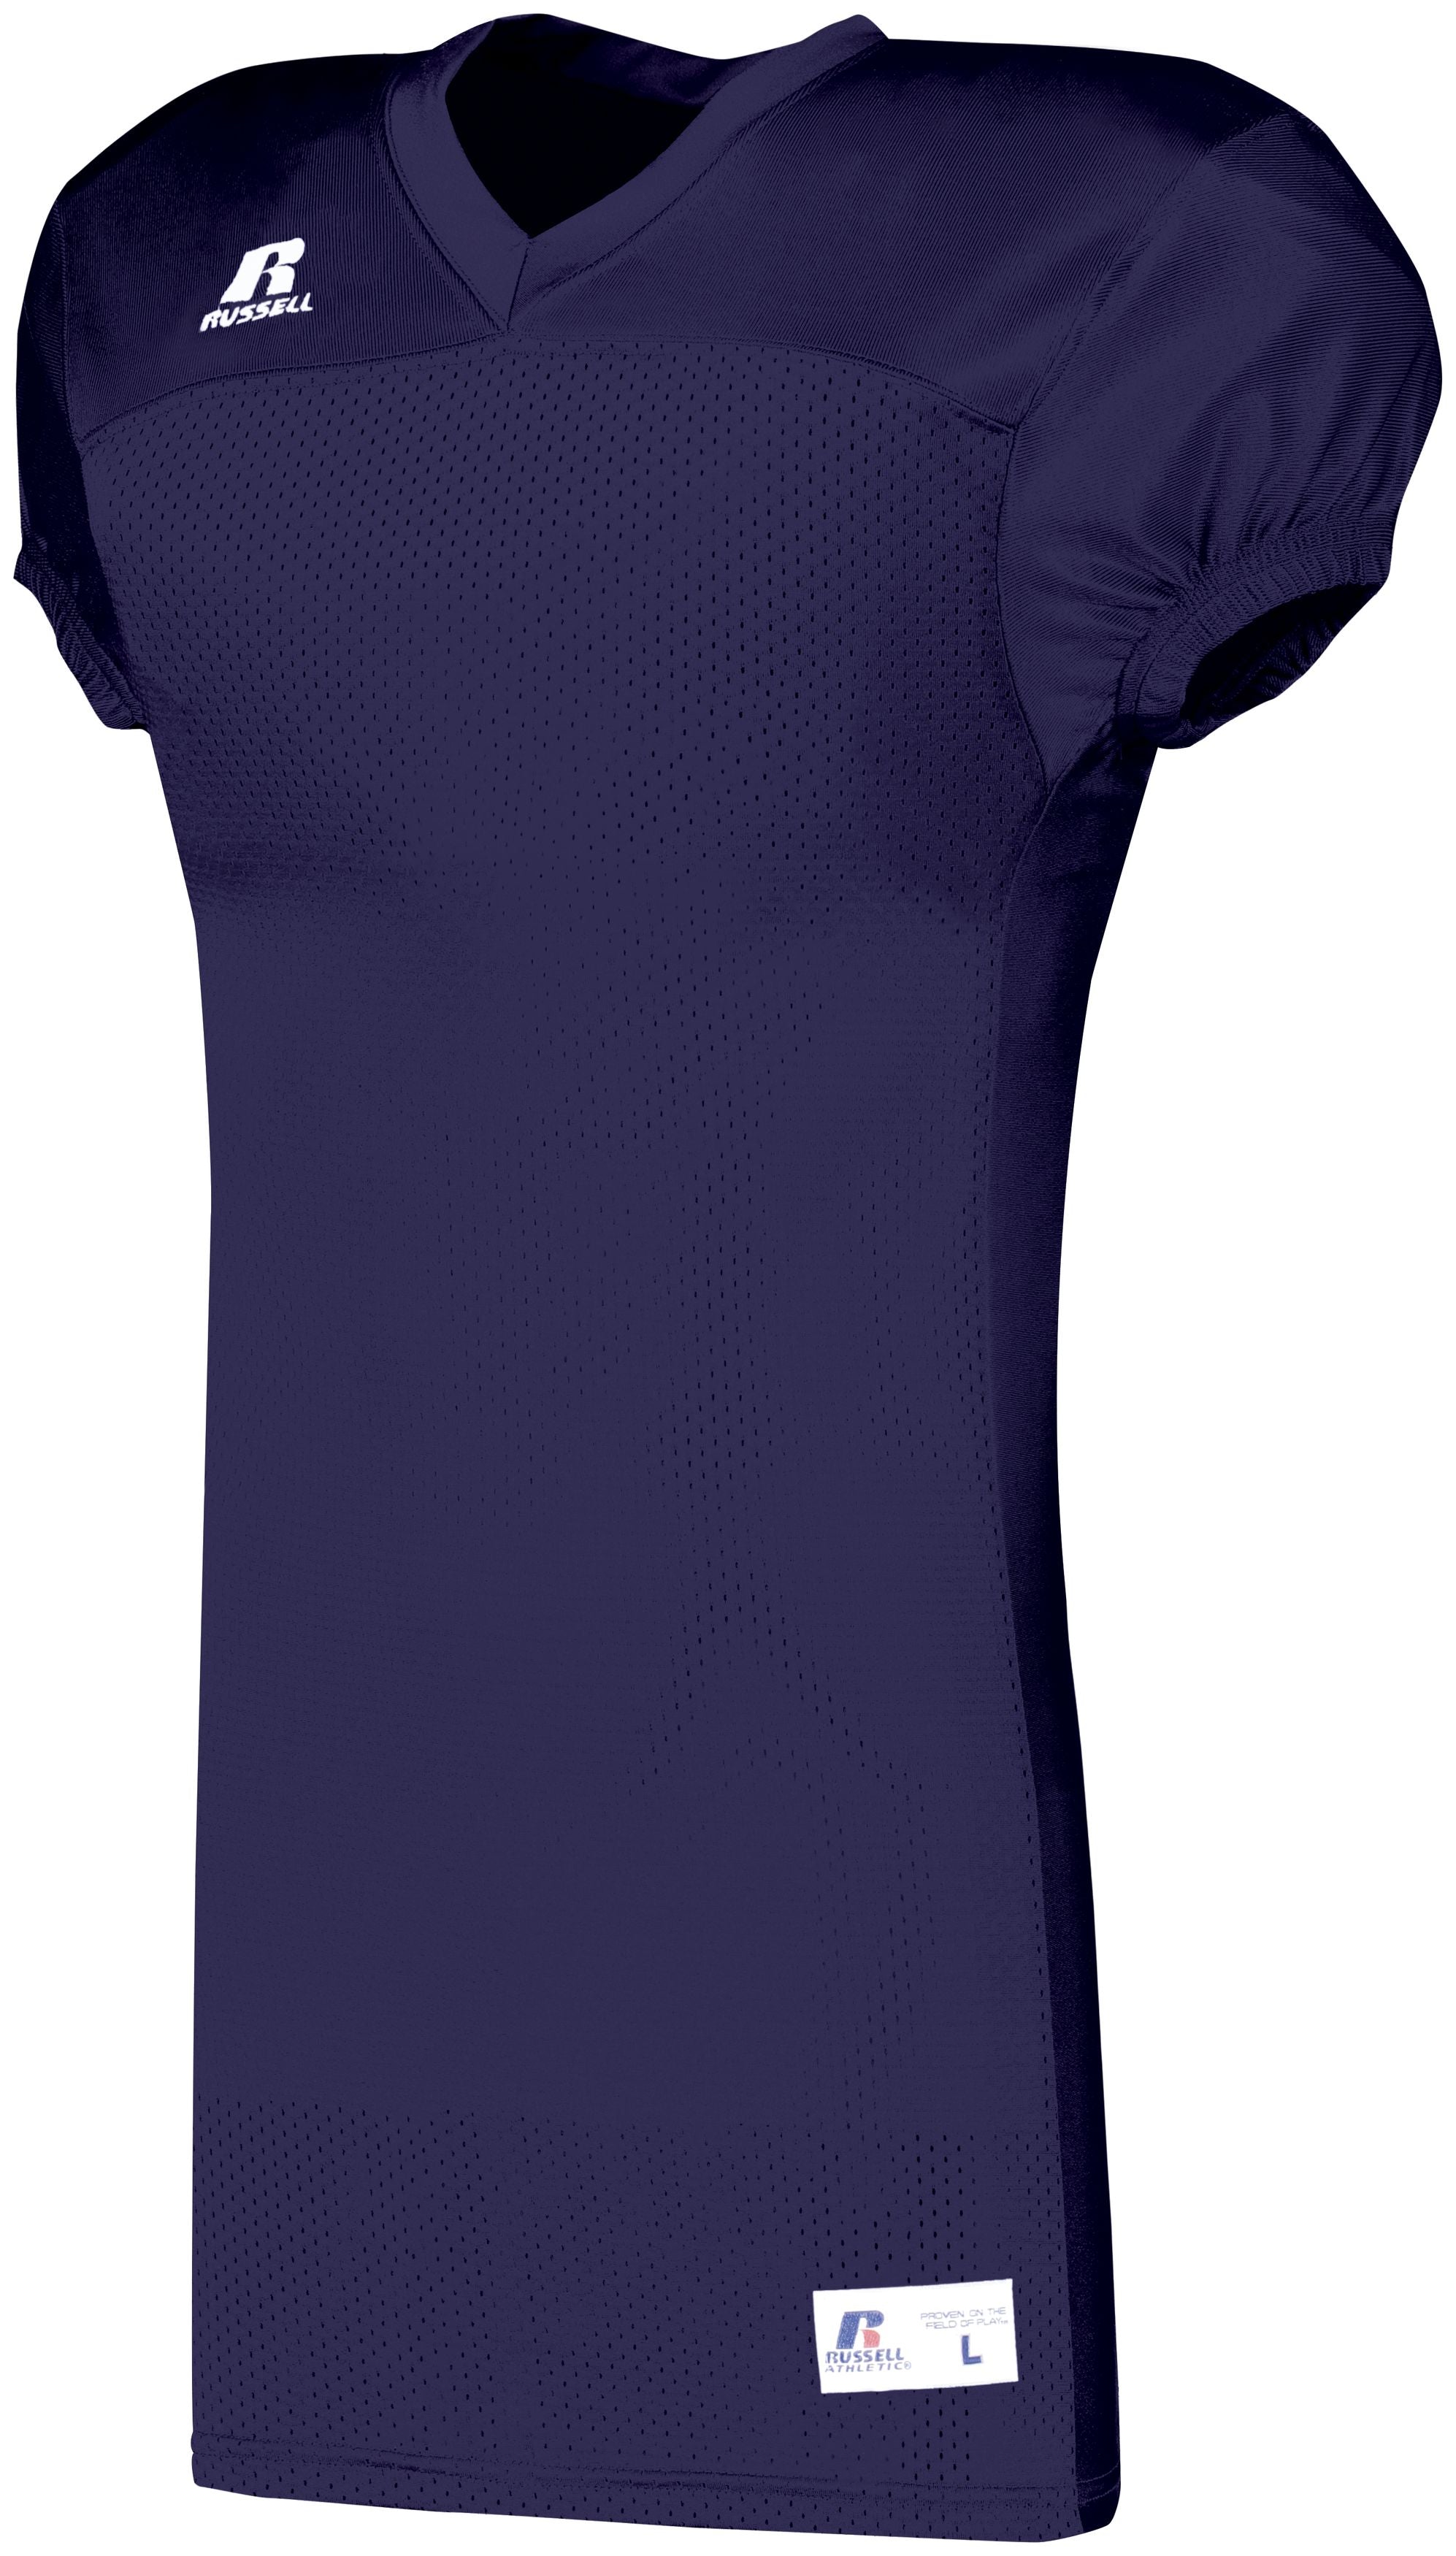 Russell Athletic Solid Jersey With Side Inserts in Purple  -Part of the Adult, Adult-Jersey, Football, Russell-Athletic-Products, Shirts, All-Sports, All-Sports-1 product lines at KanaleyCreations.com